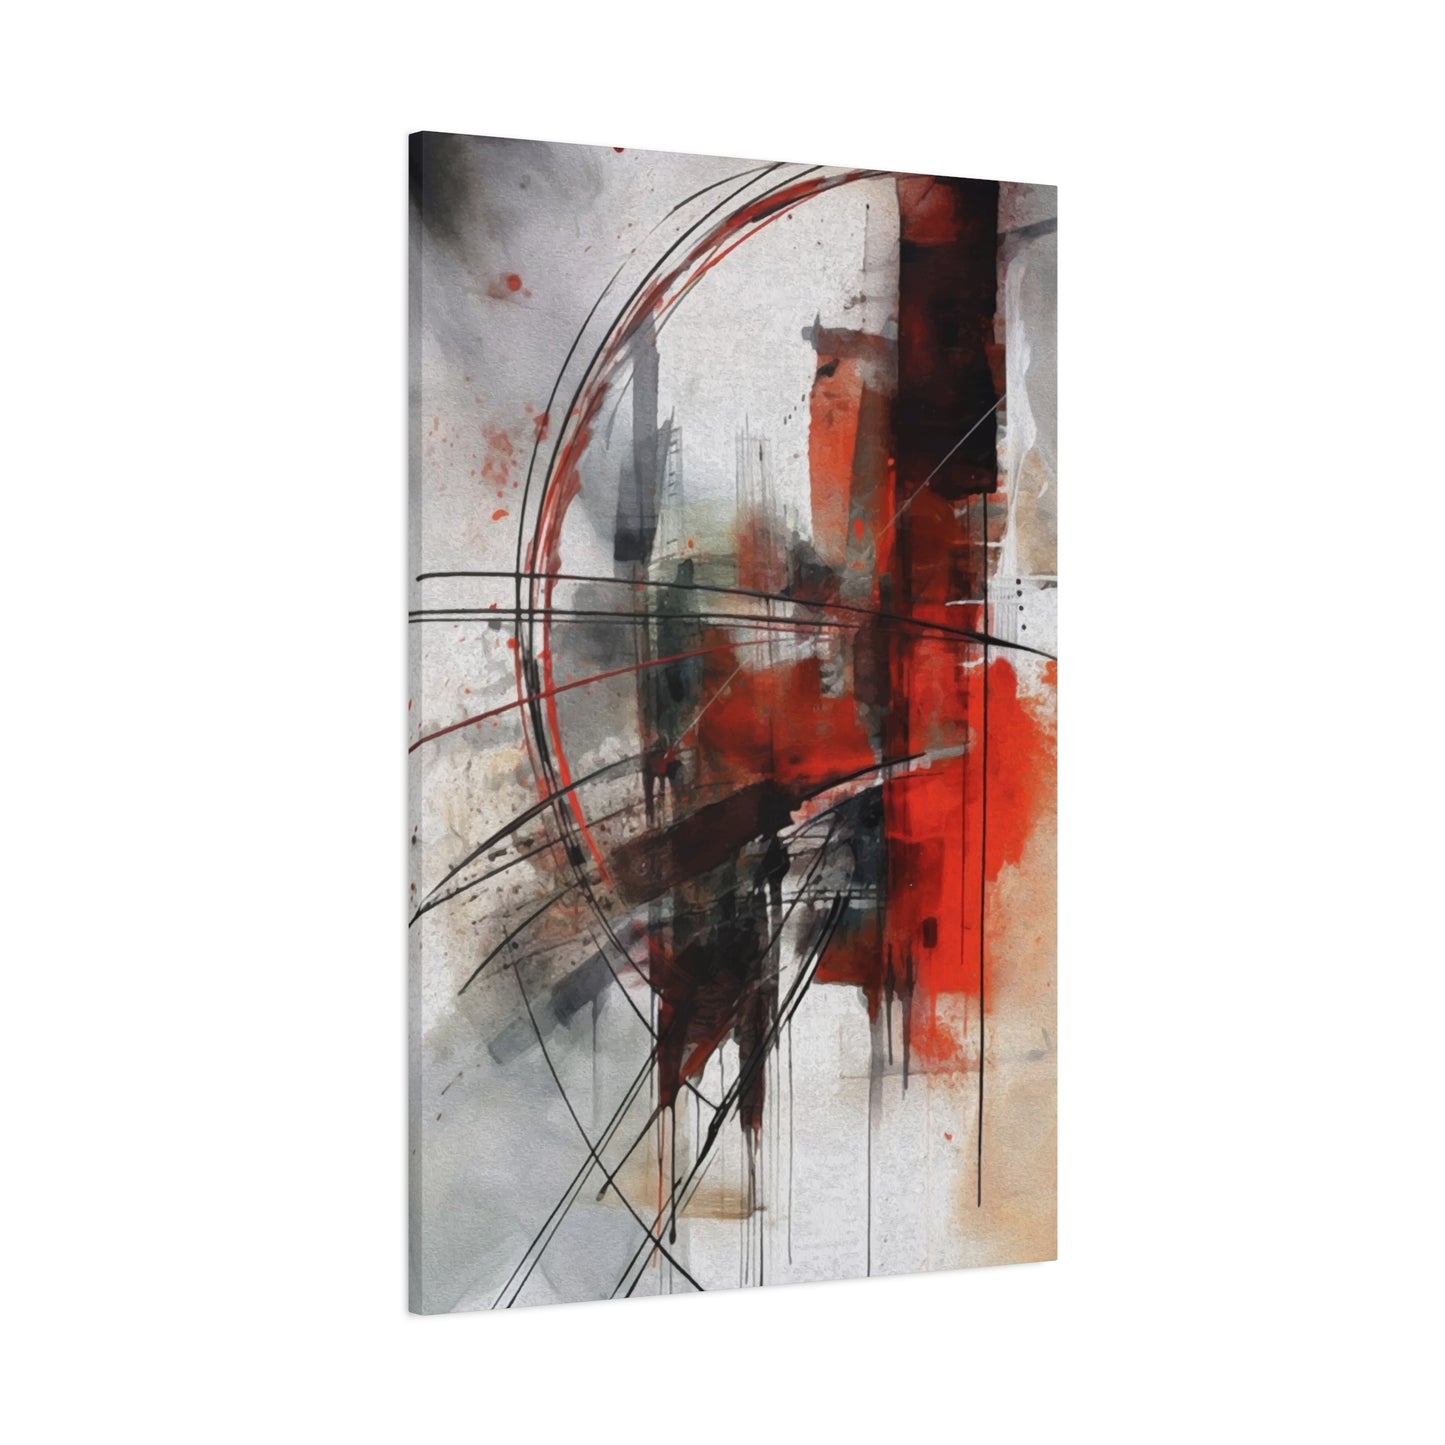 Alone Abstract Wall Art & Canvas Prints